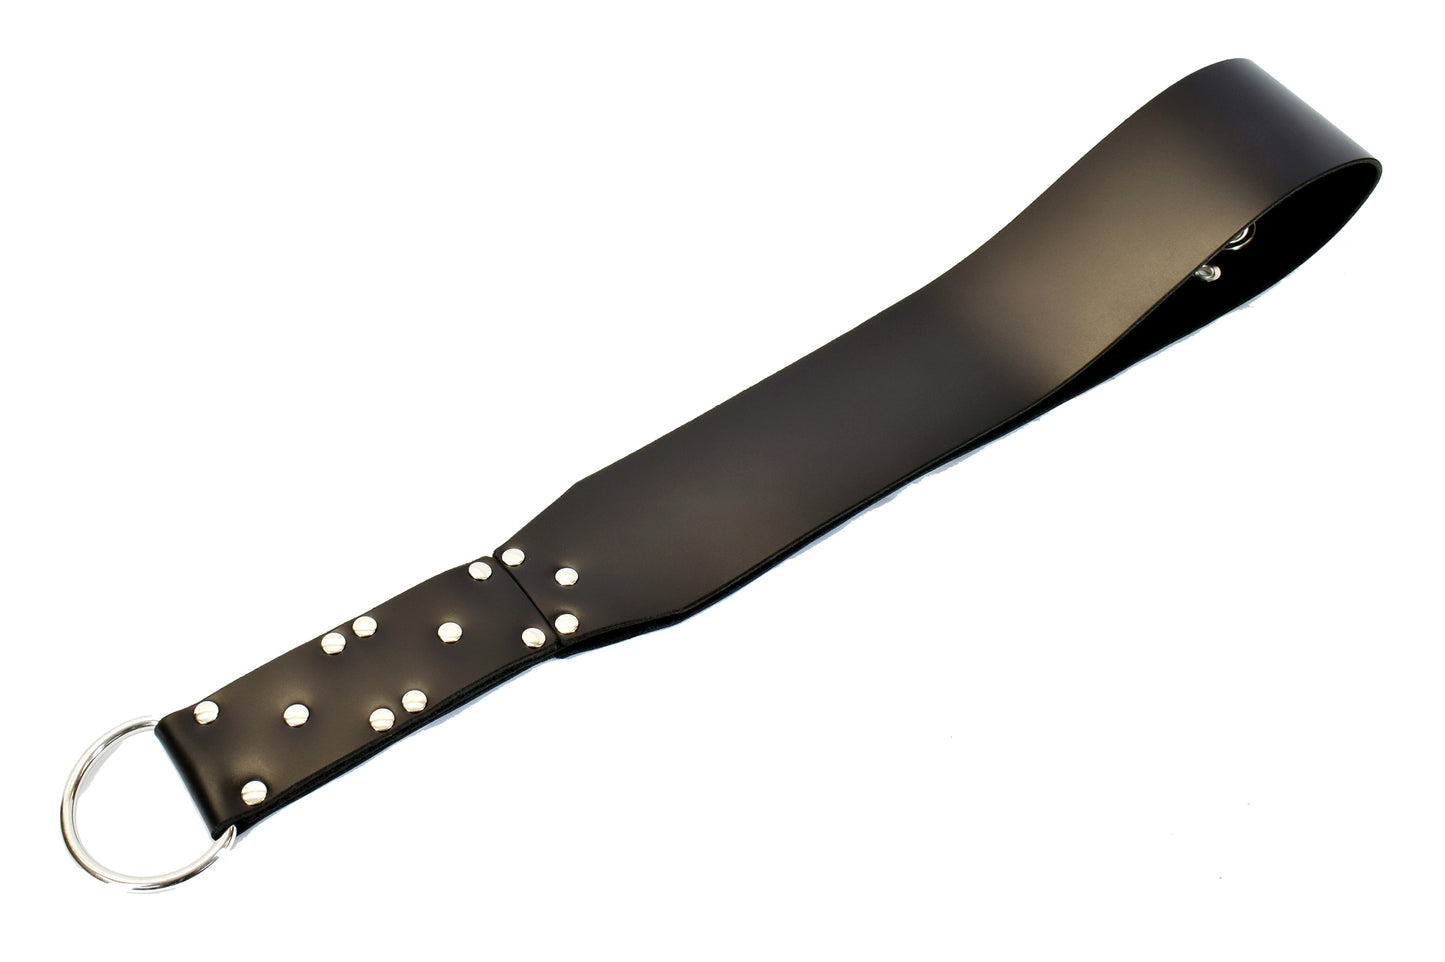 Black big leather slapper strap laid straight out on reverse side without tentacle detailing, against white background